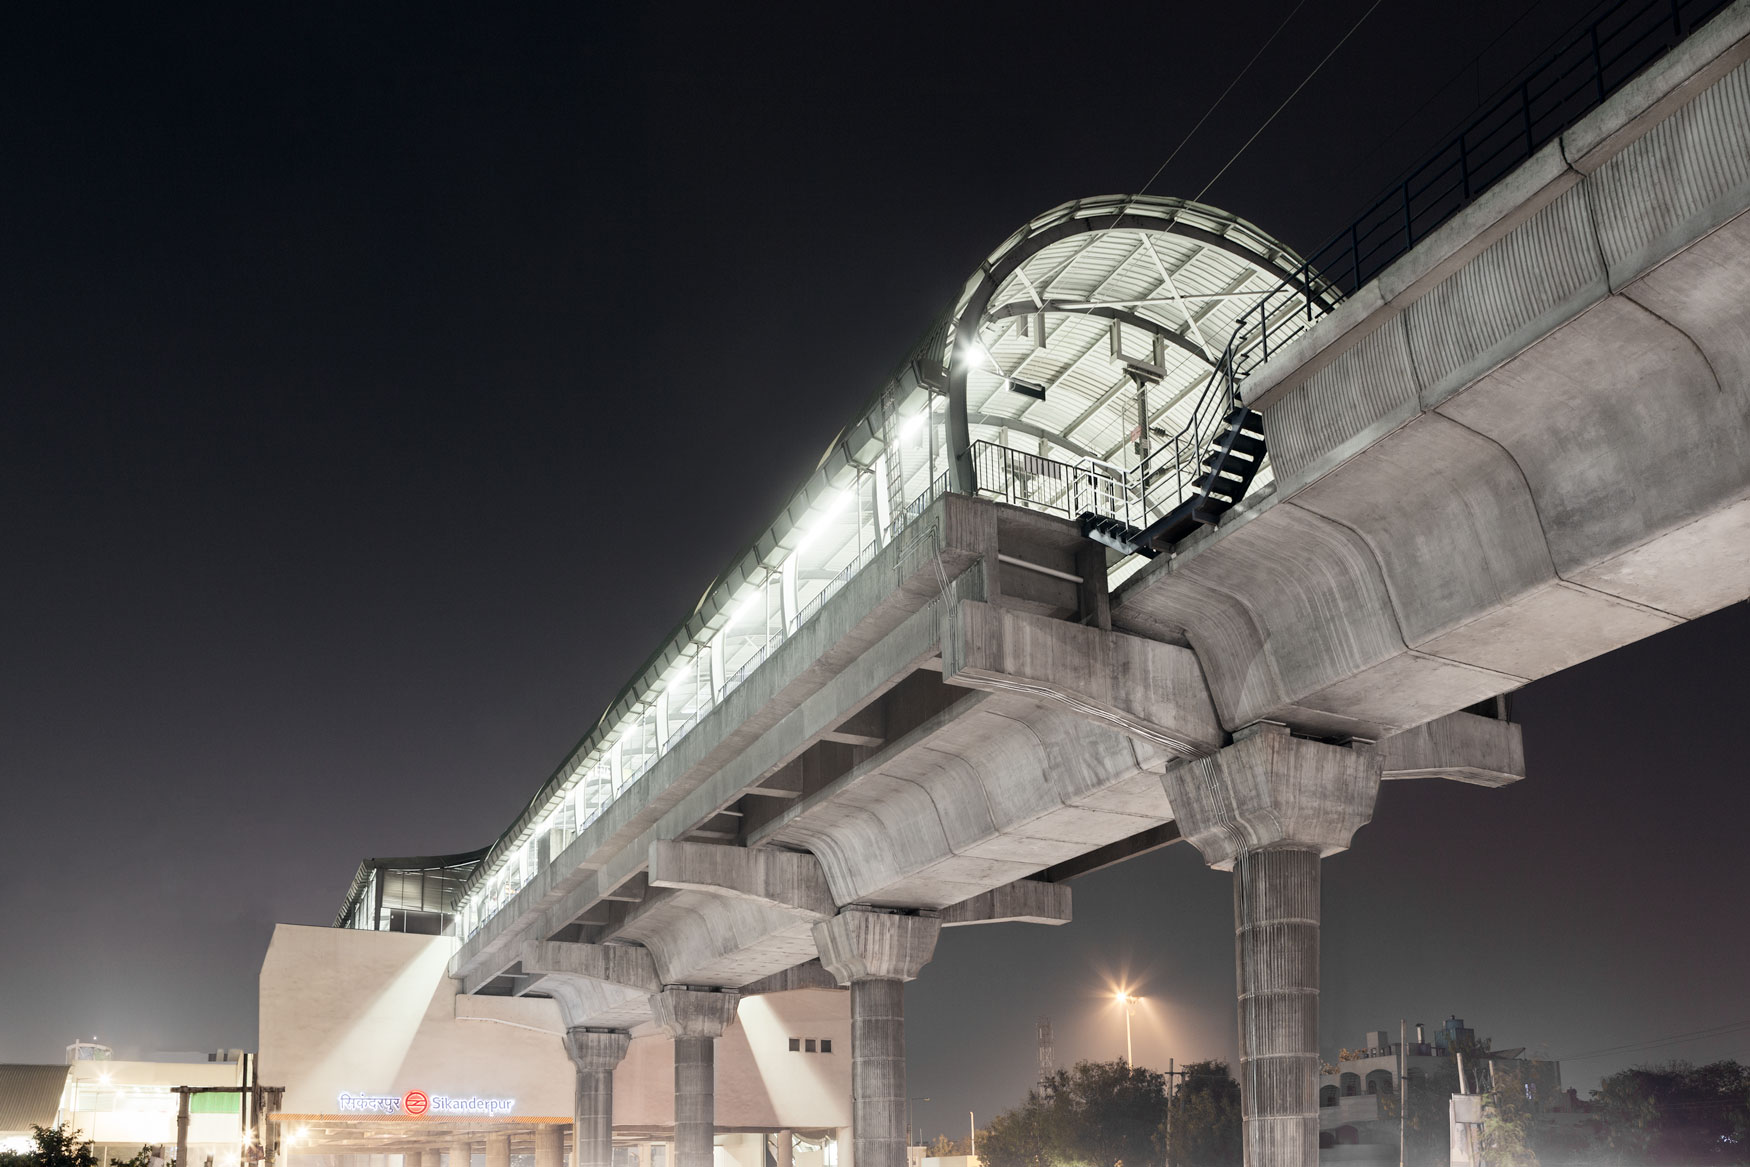 Infrastructure projects in New Delhi for India Capital/Winkreative